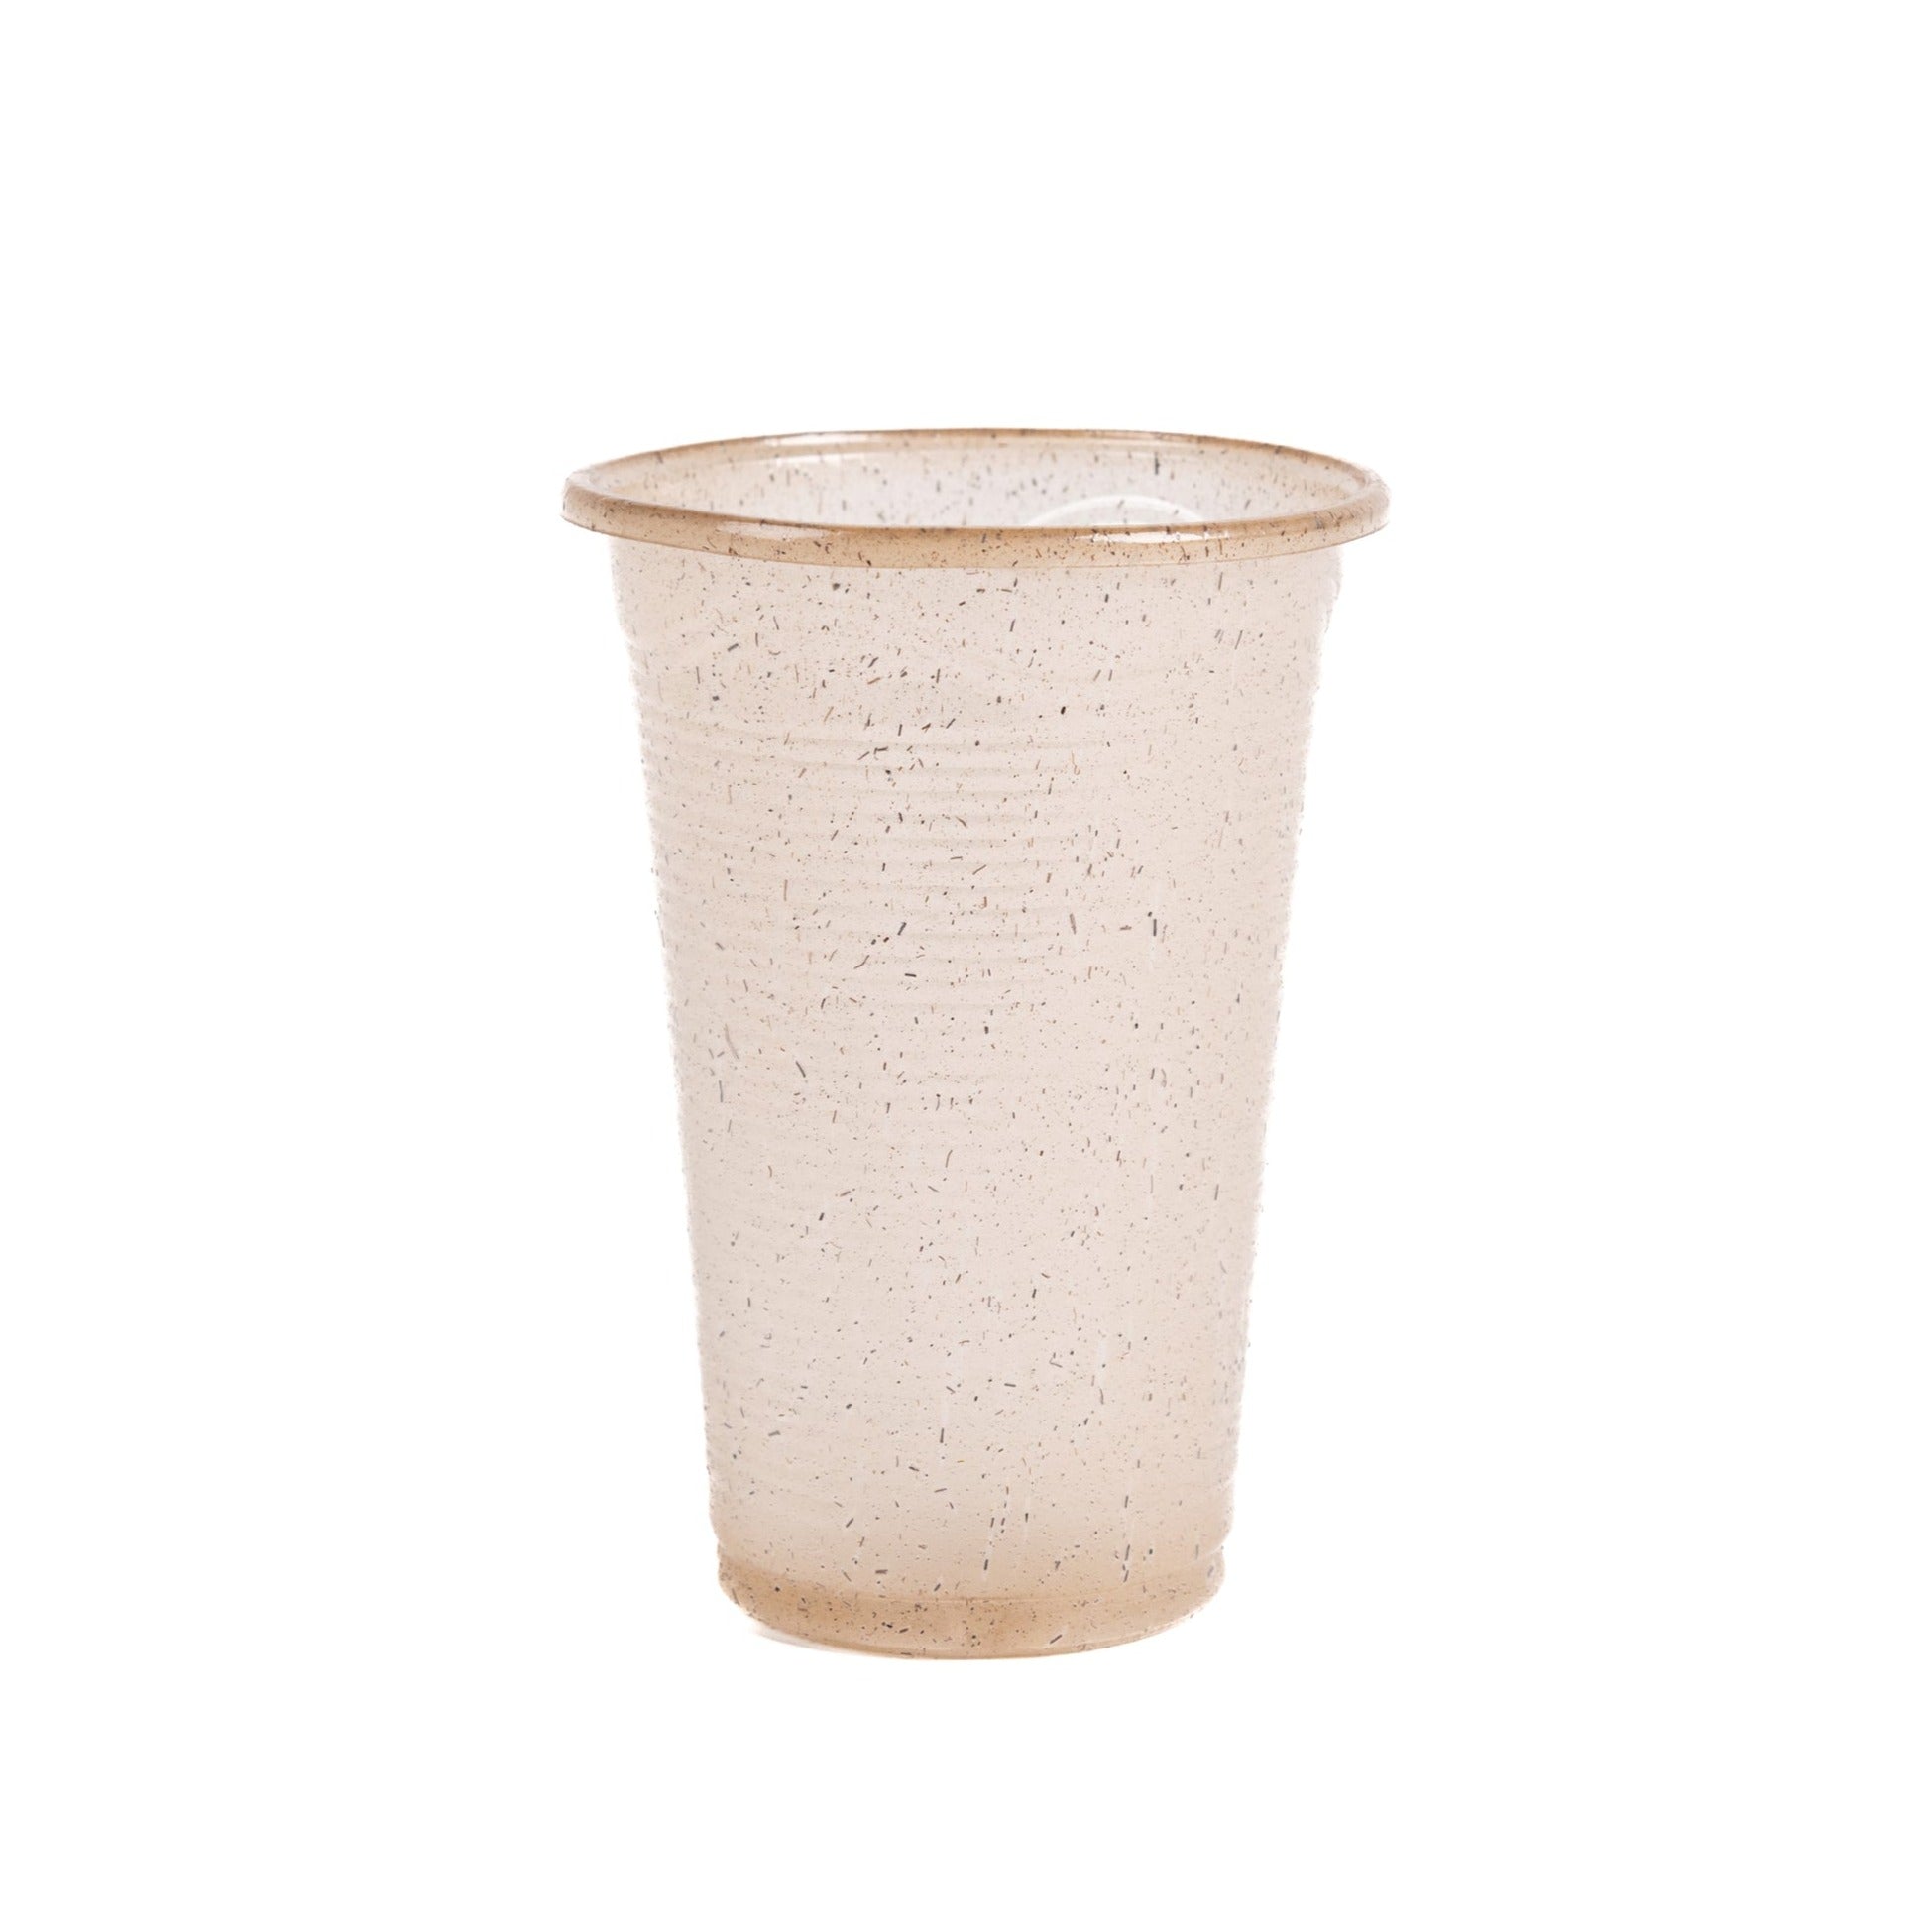 Biodegradable Agave Clear Cups